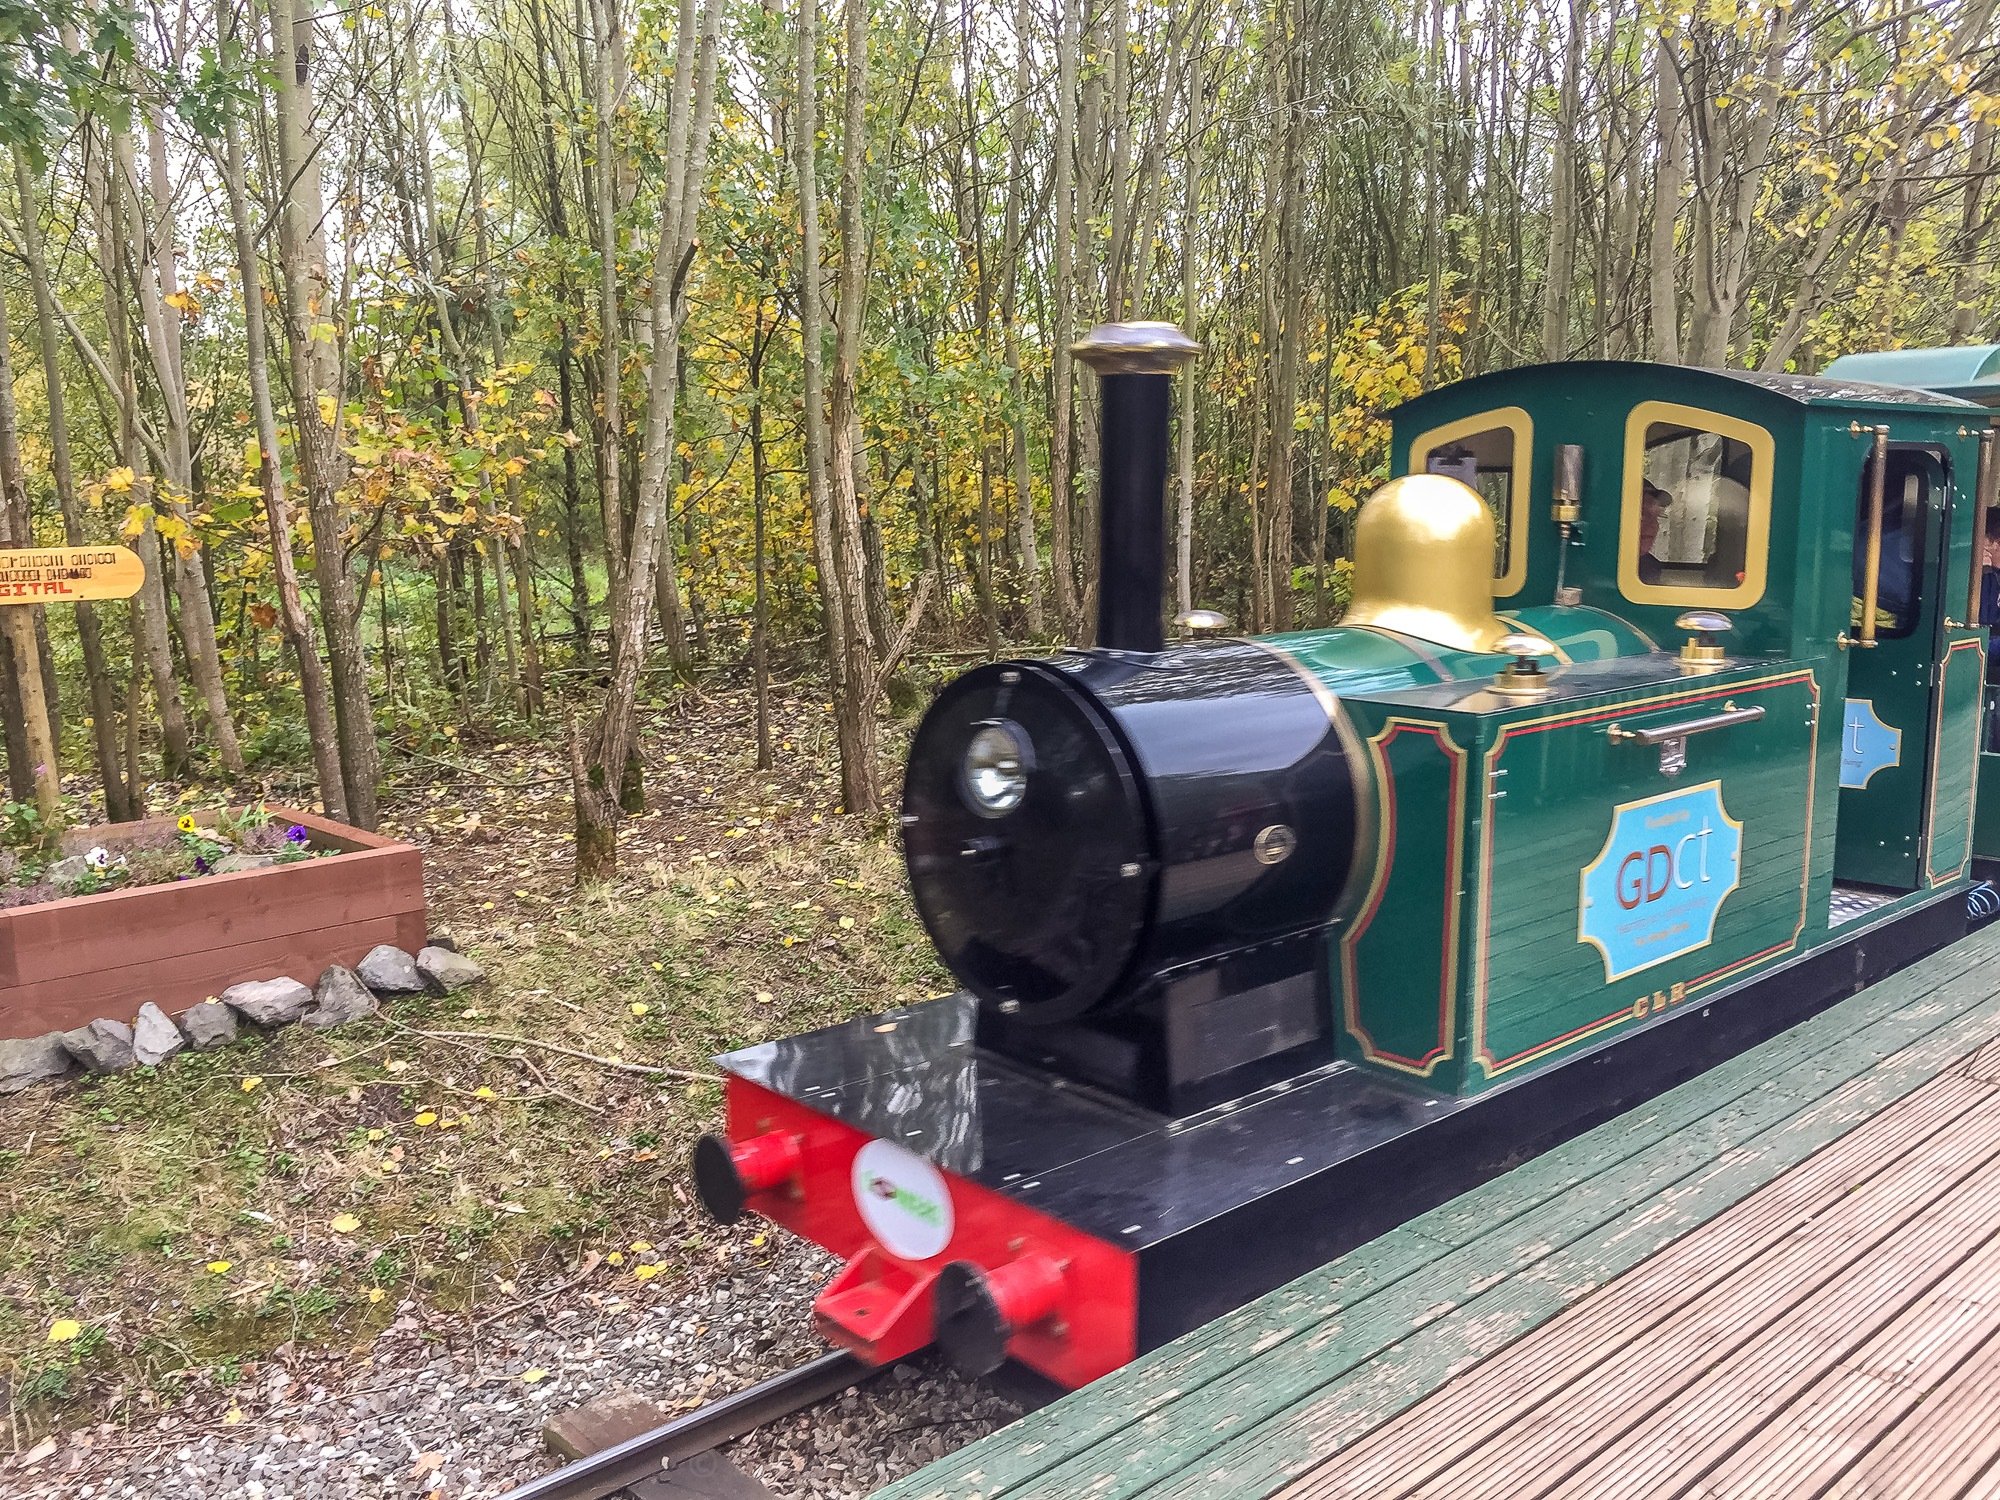 The train takes you from the main Conkers Discovery Centre to Conkers Waterside